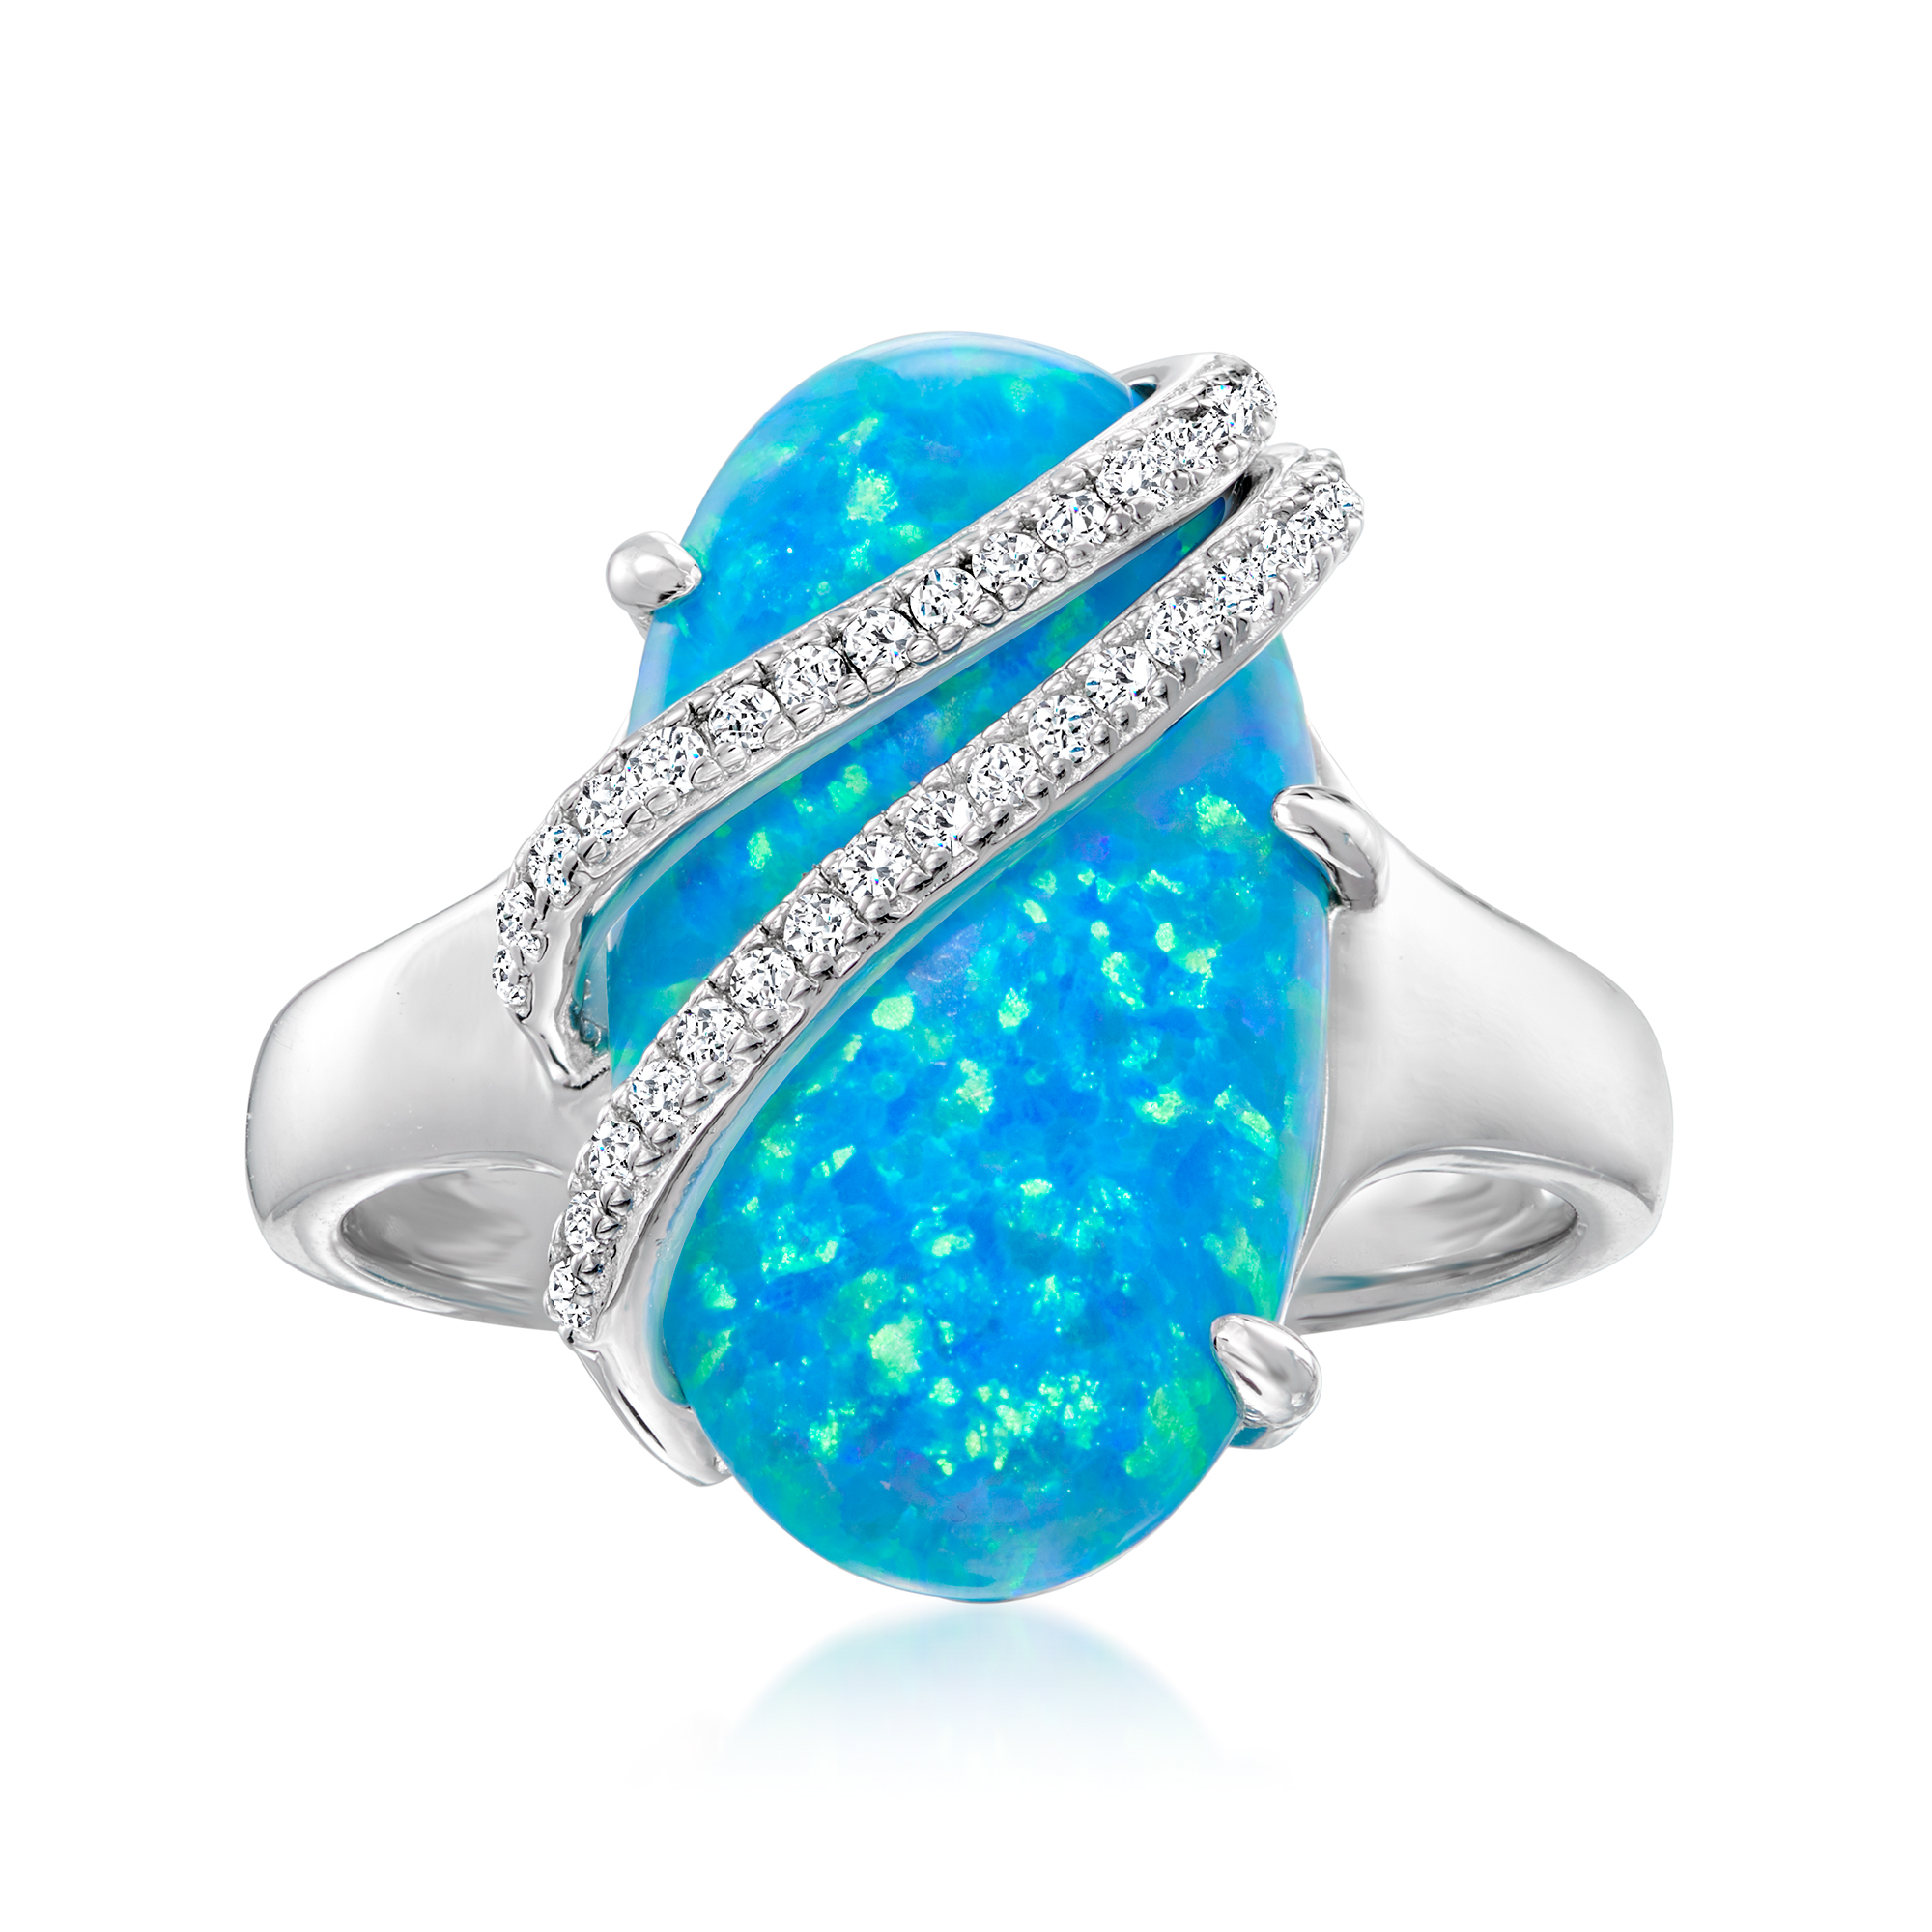 Charles Garnier Synthetic Blue Opal Ring with .16 ct. t.w. CZs in Sterling  Silver | Ross-Simons